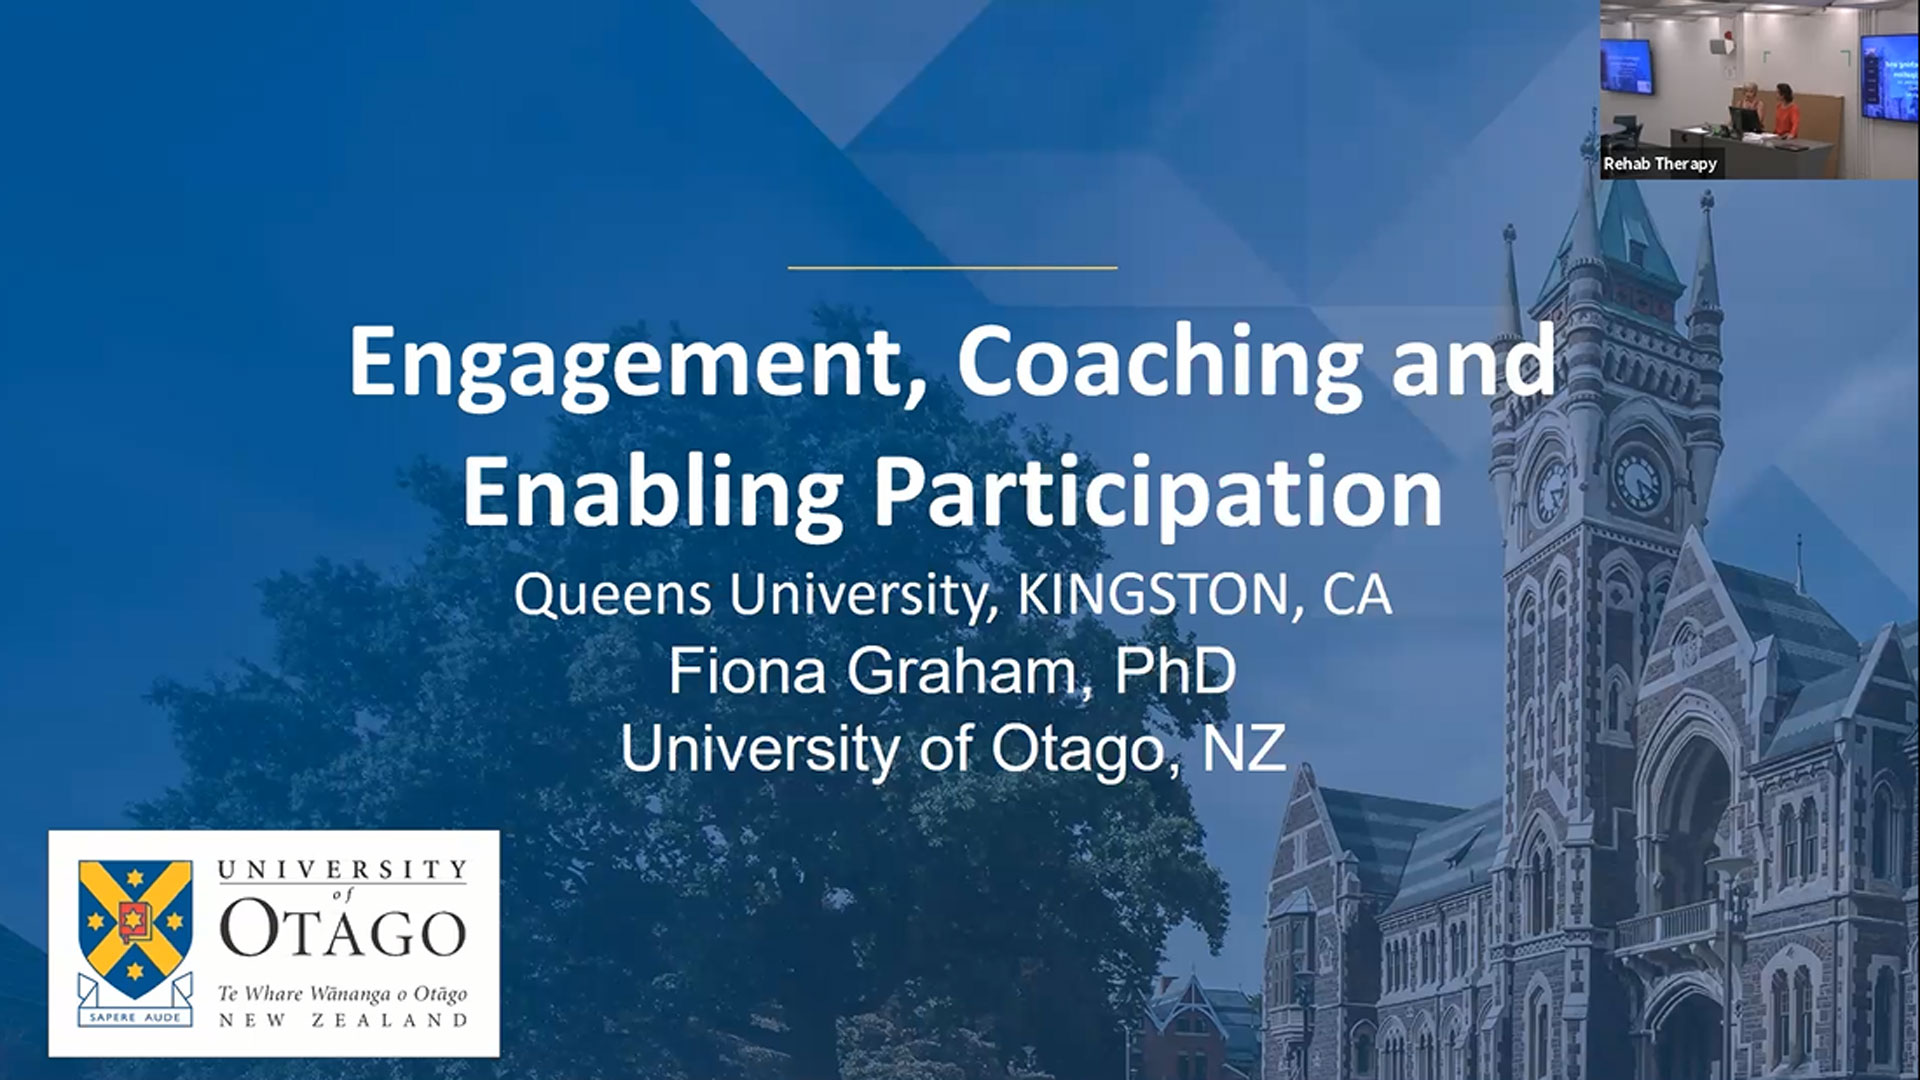 Engagement, Coaching and Enabling Greater Participation - not working